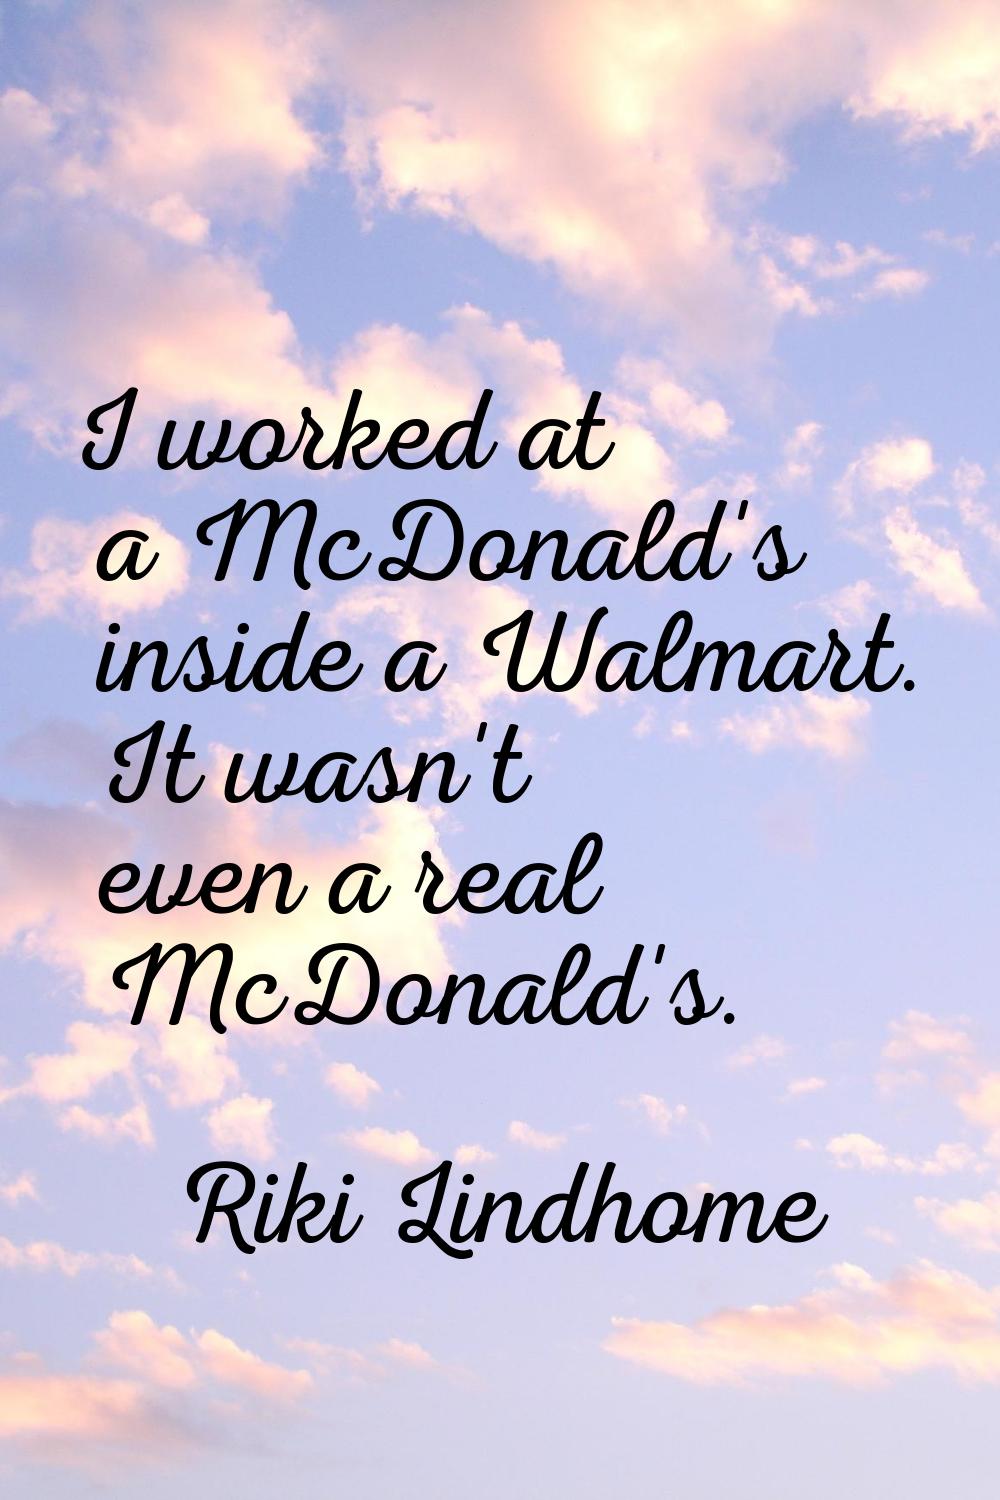 I worked at a McDonald's inside a Walmart. It wasn't even a real McDonald's.